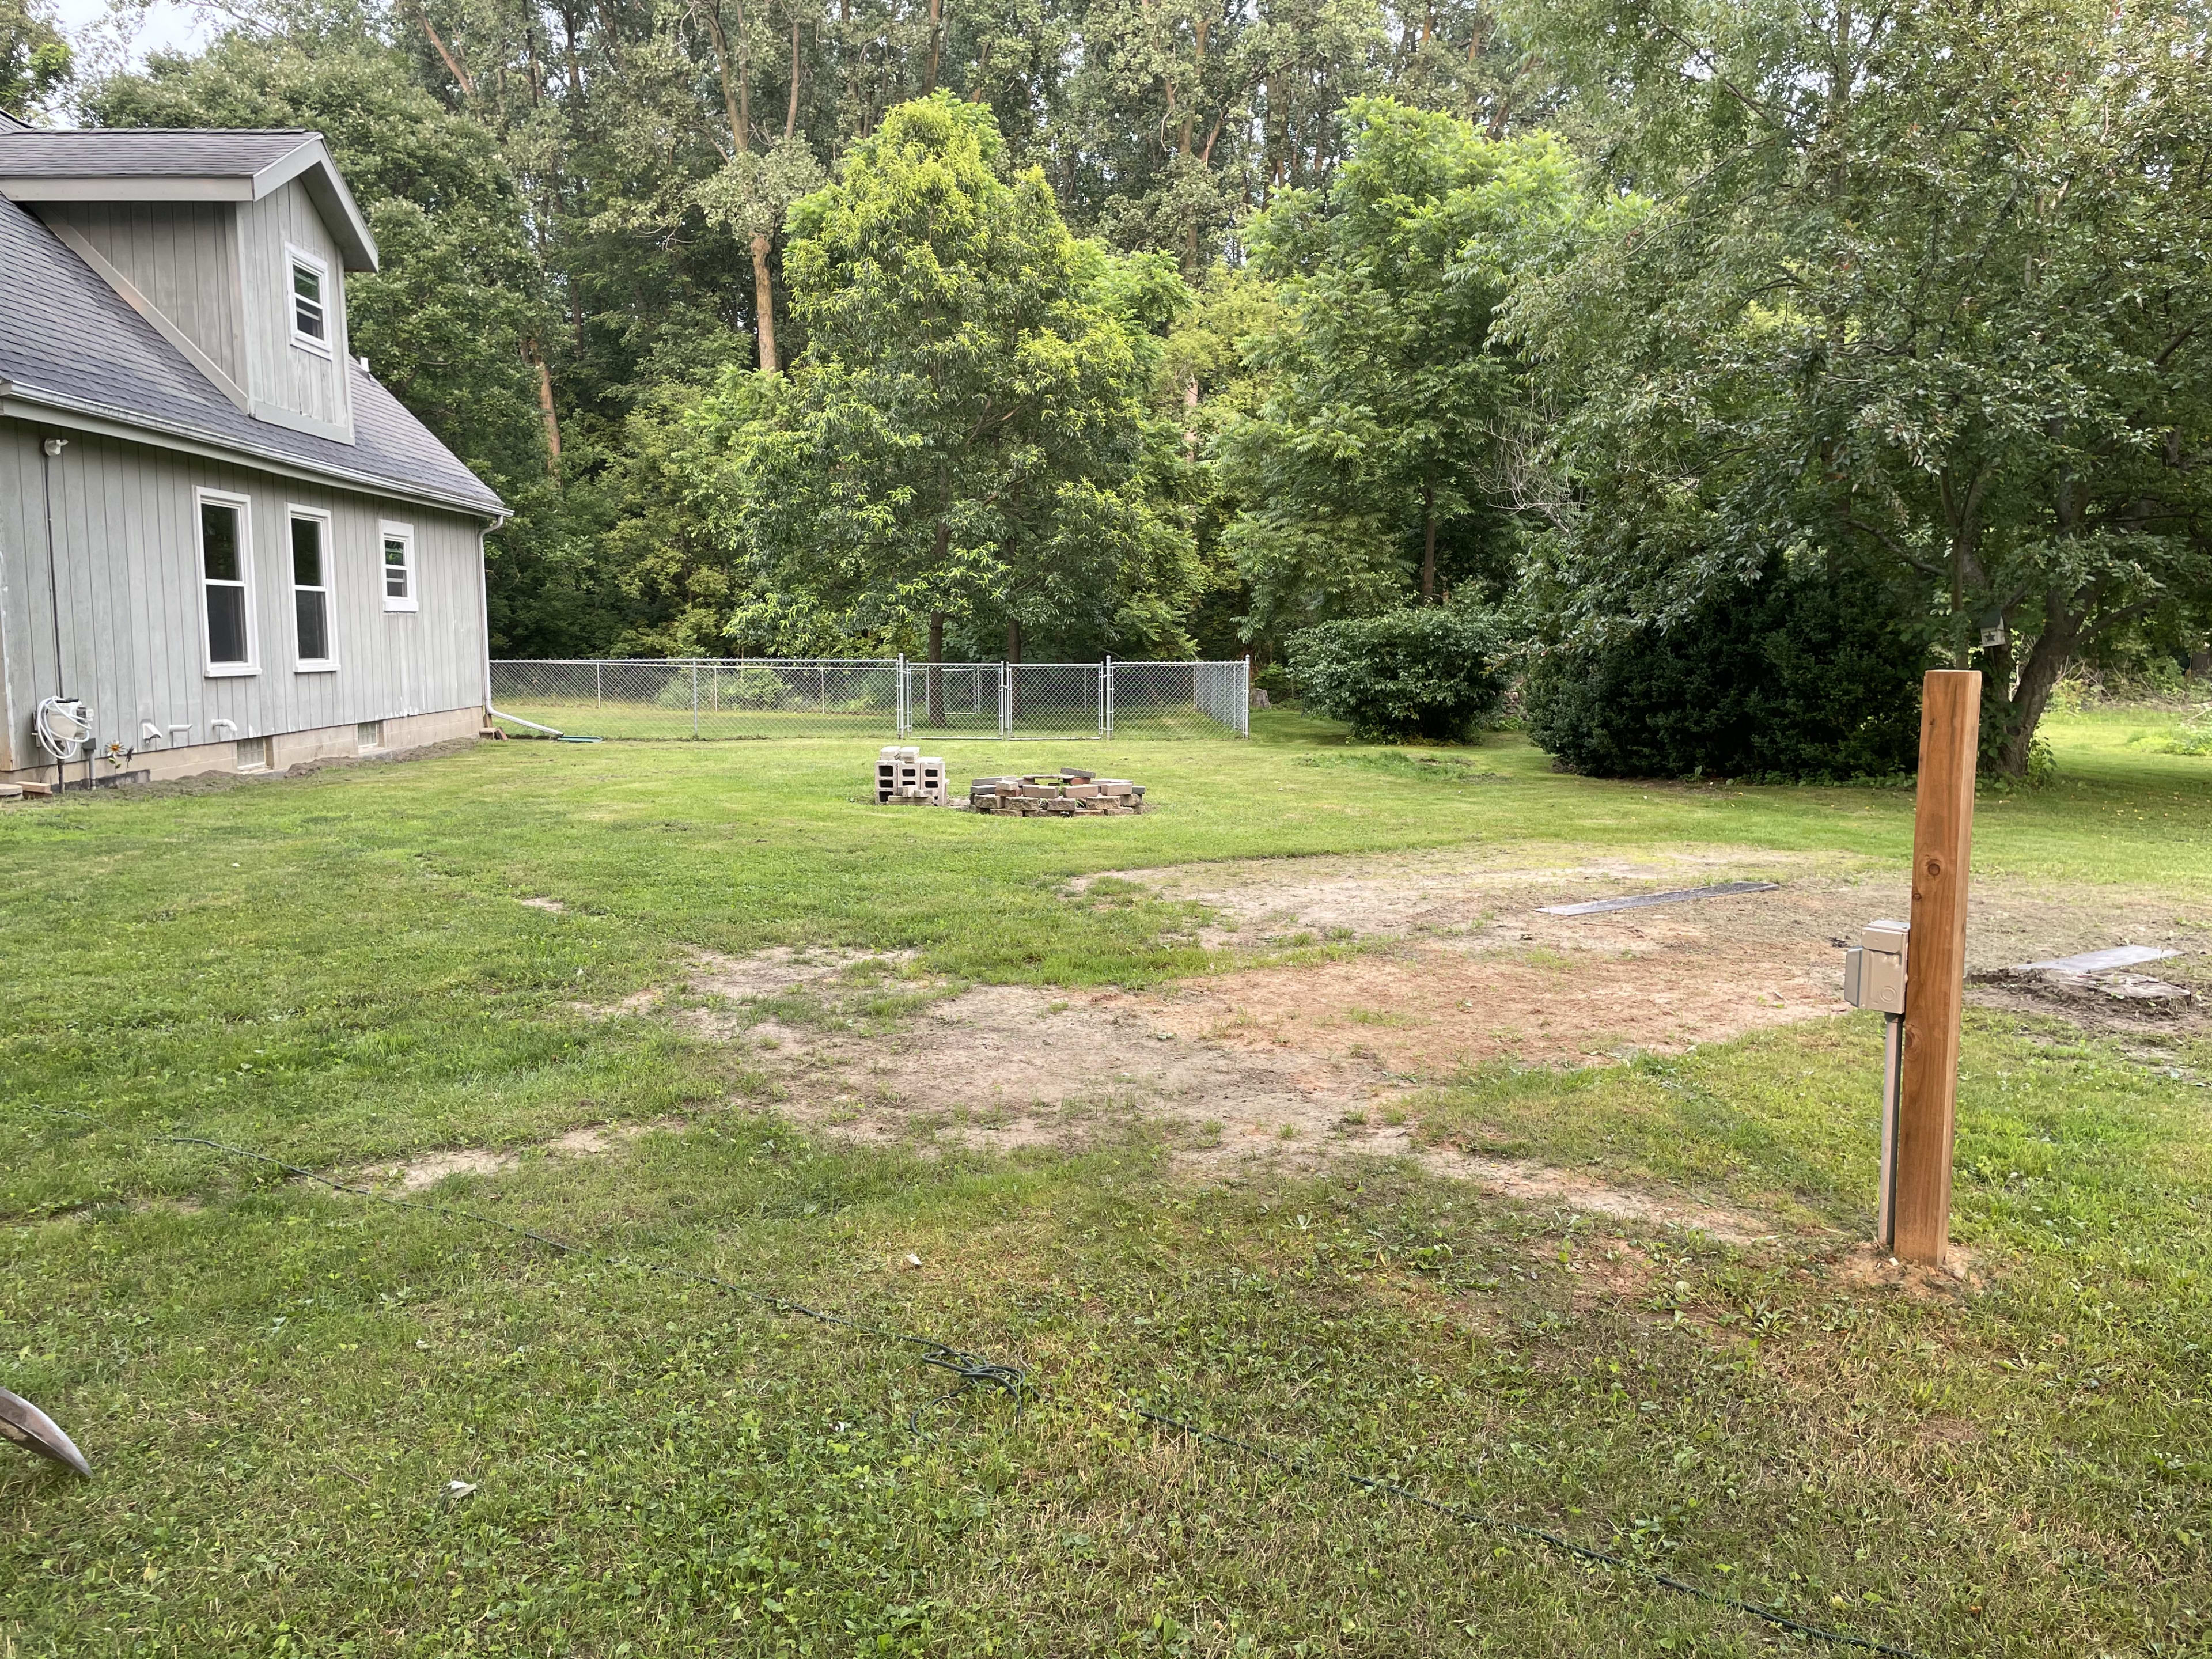 Property owner’s house is very close to the camping area. The dirt areas are where RVs park and camping rugs have been put down. You can follow that process or do your own thing. 